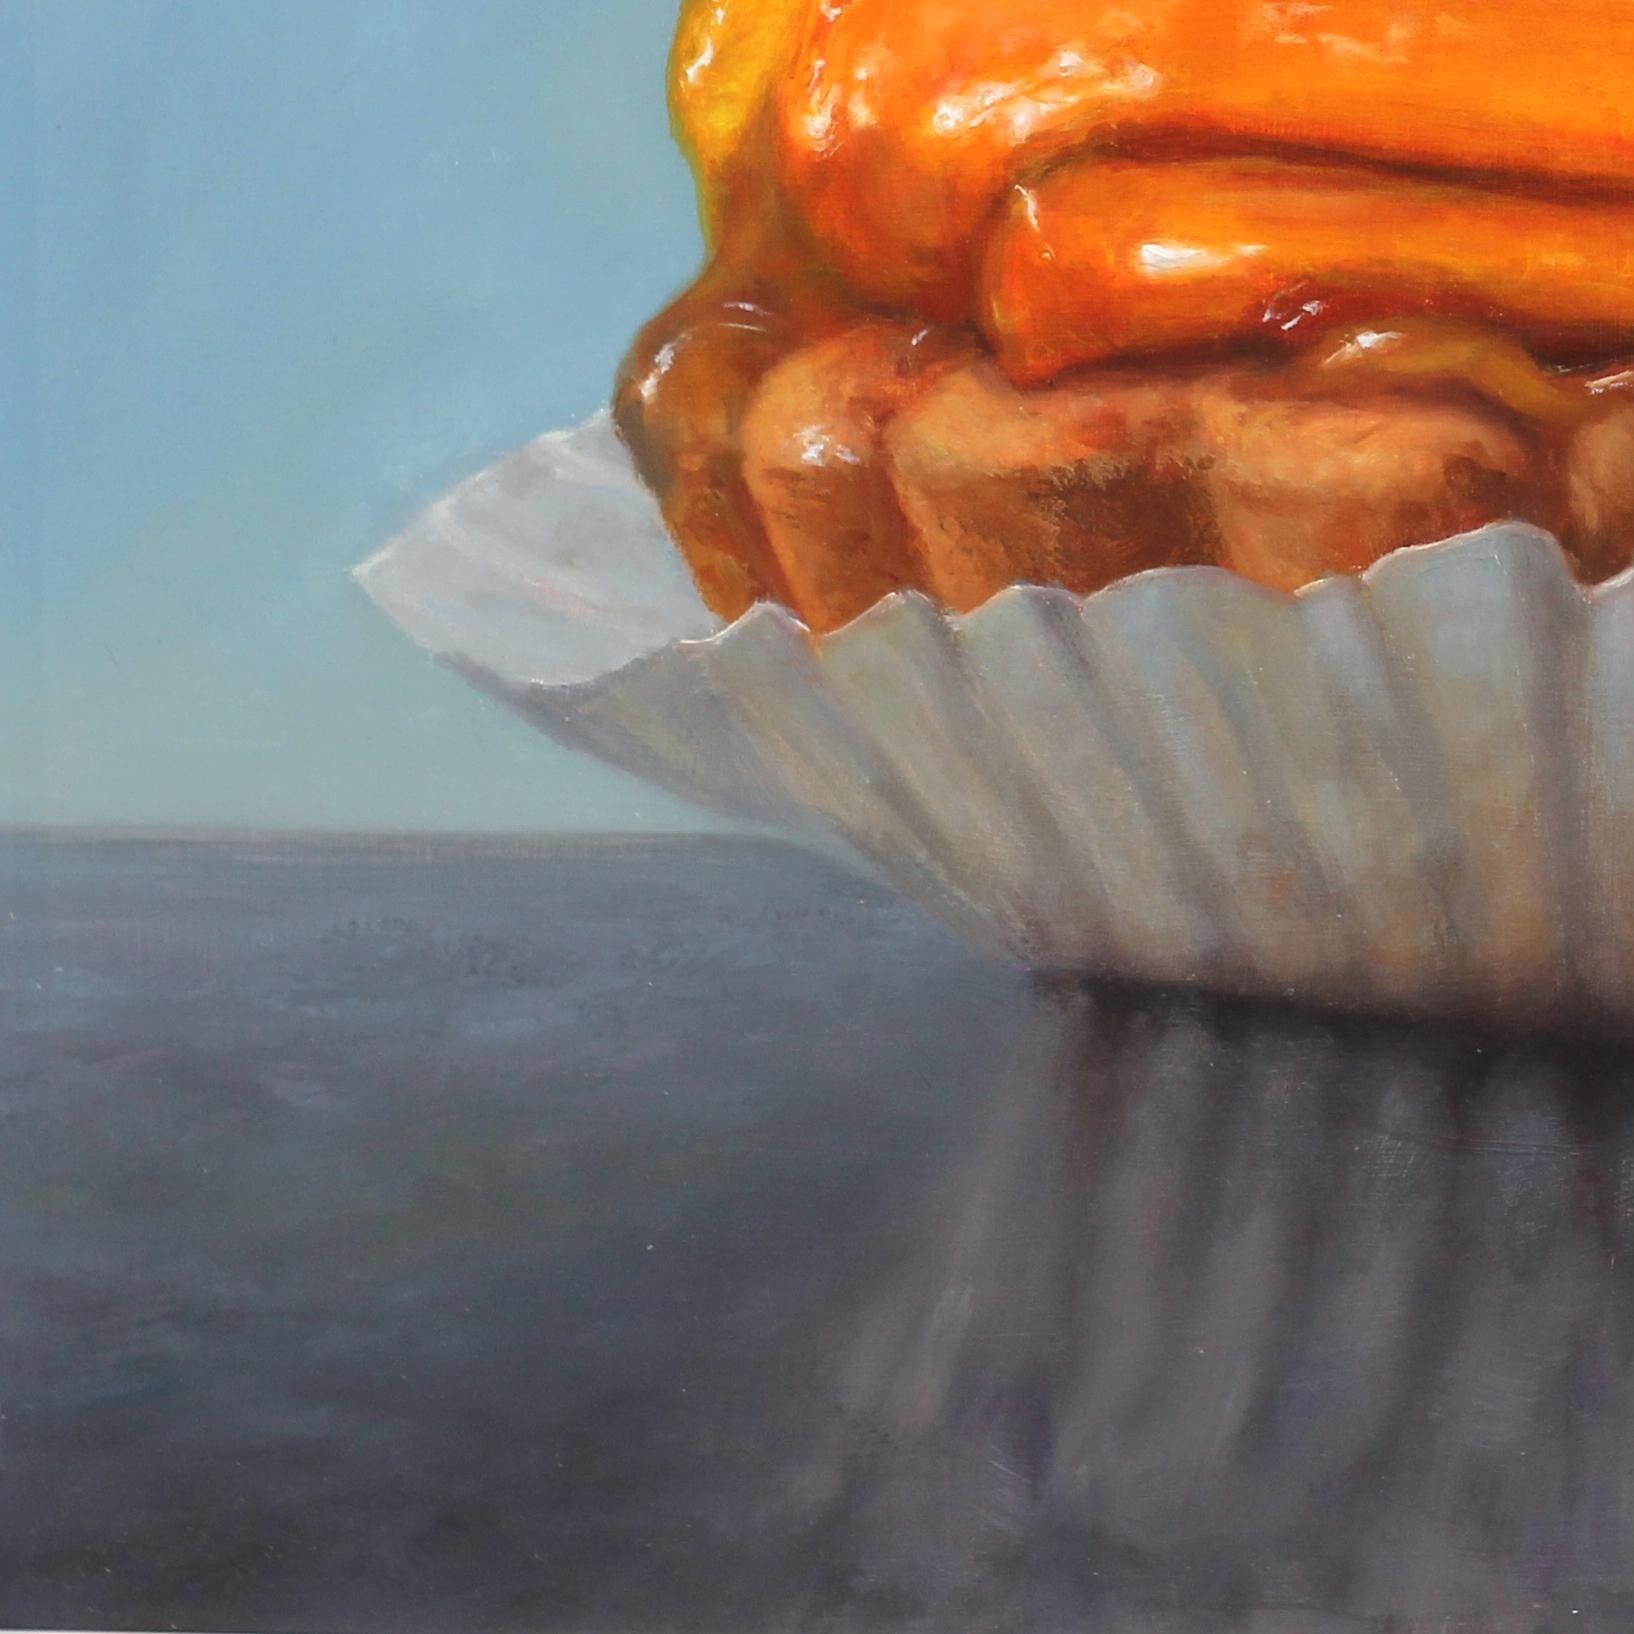 Stuart Dunkel has spent decades refining his hyper-realistic style. He paints realistic imagery based on real-world inspirations. His paintings show that everyday objects can be fascinating. Dunkel is an artist, a musician, and an author.  He has